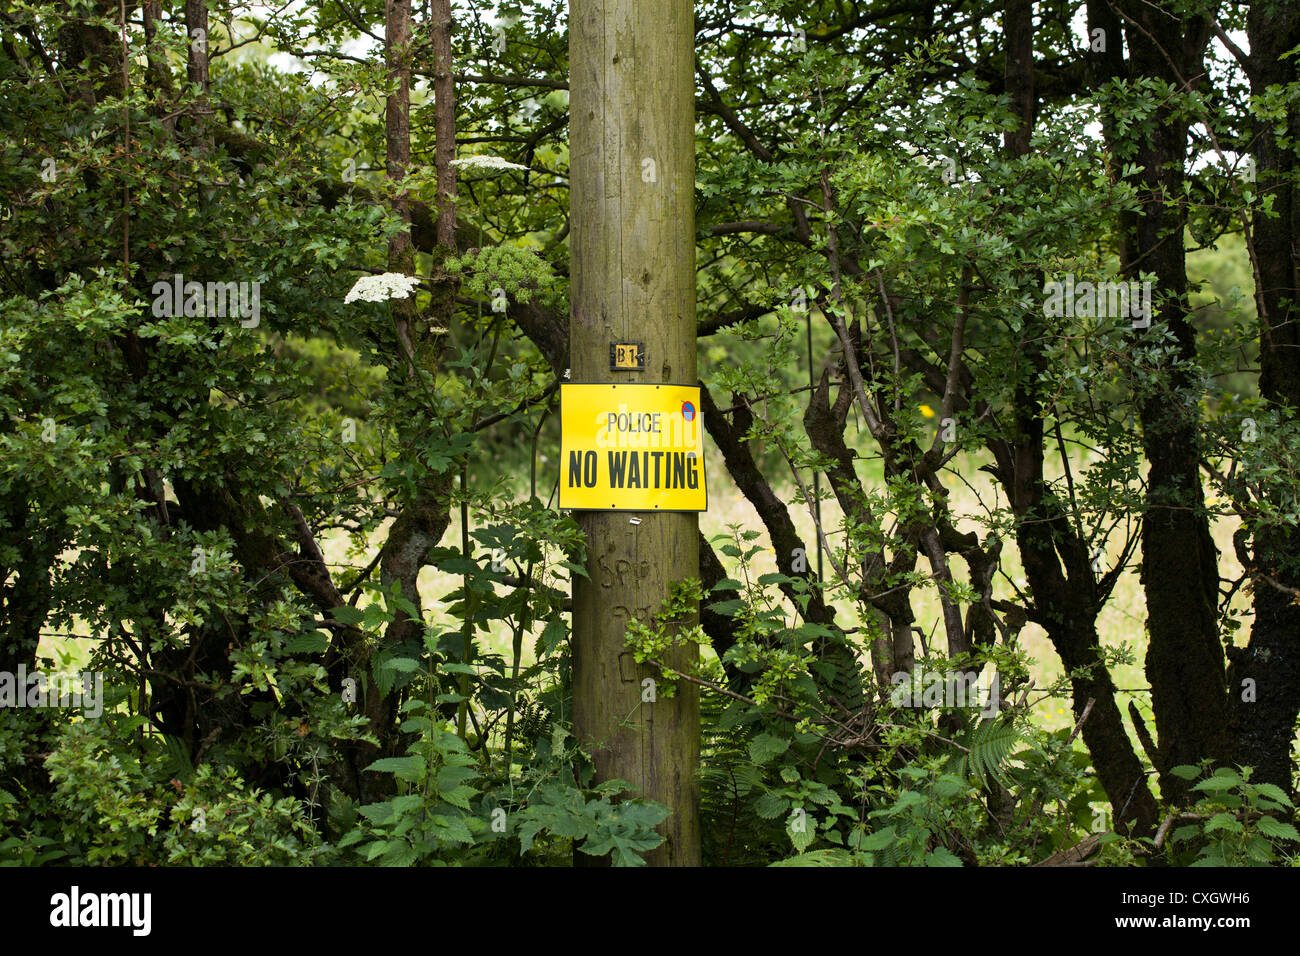 Police No Waiting sign on telegraph pole Stock Photo